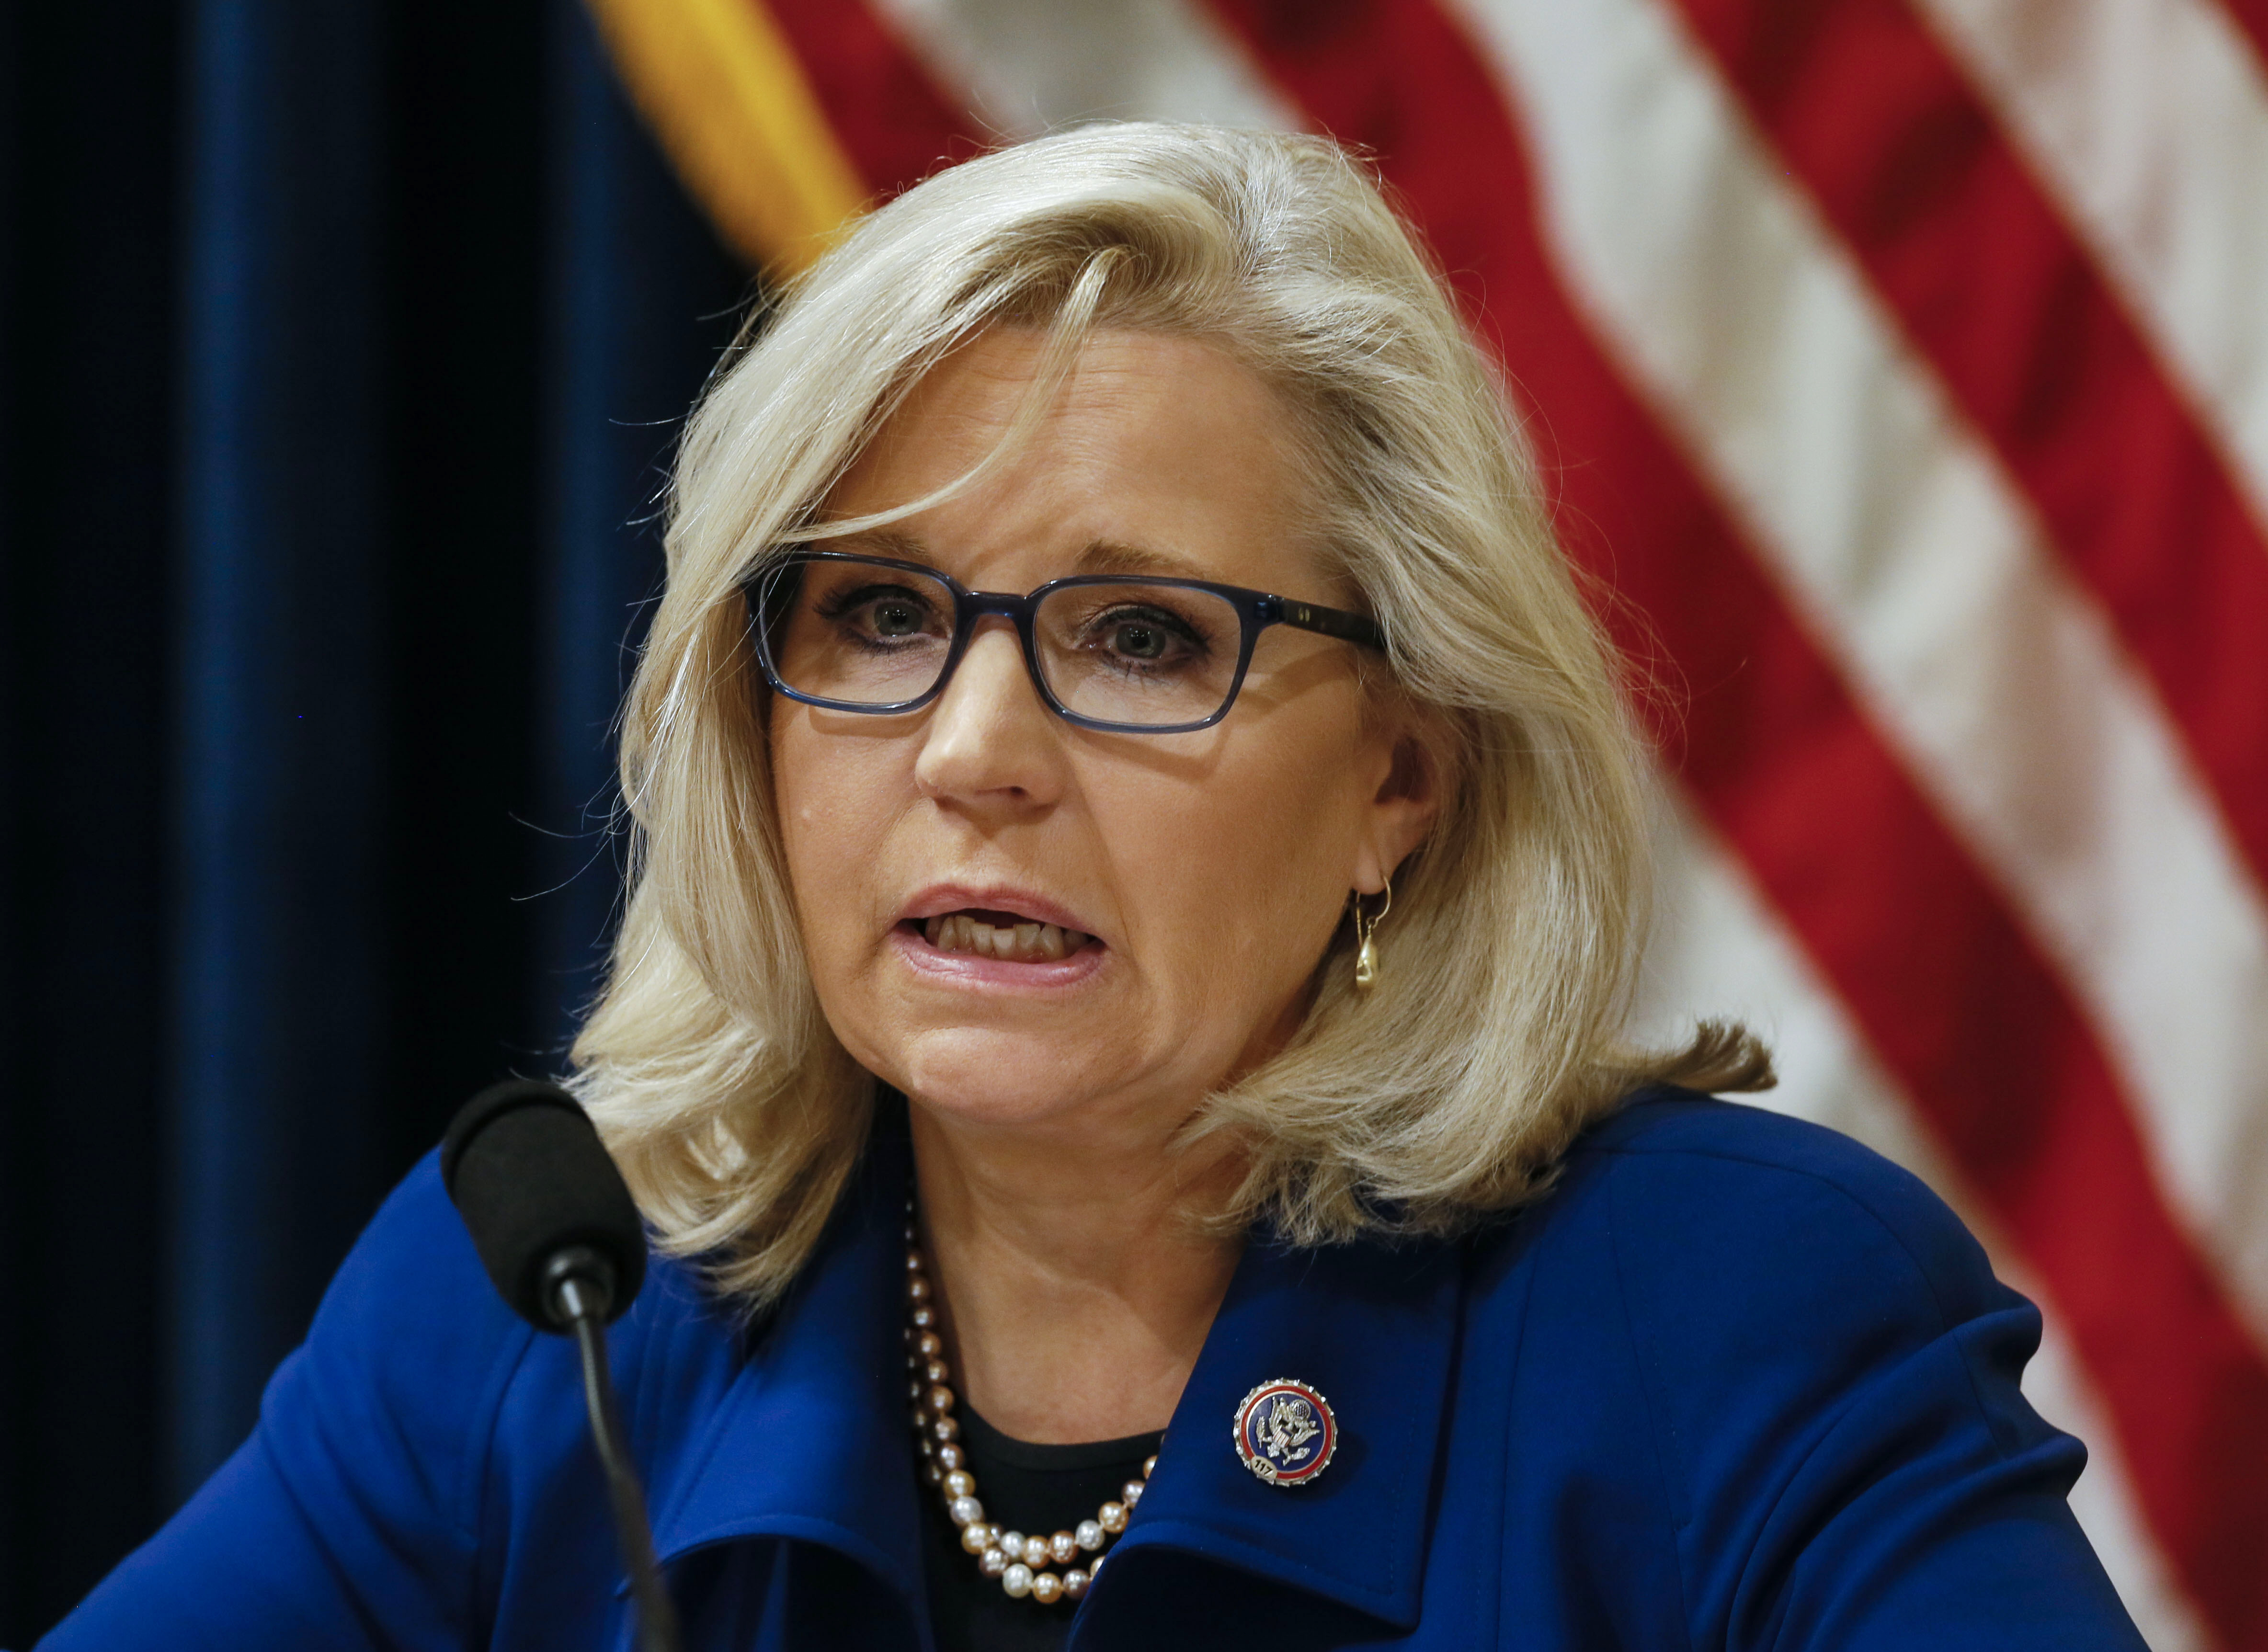 Rep. Liz Cheney (R-Wyo.) on the U.S. Capitol at the Cannon House Building in Washington, D.C. (Photo by Jim Bourg-Pool/Getty Images)